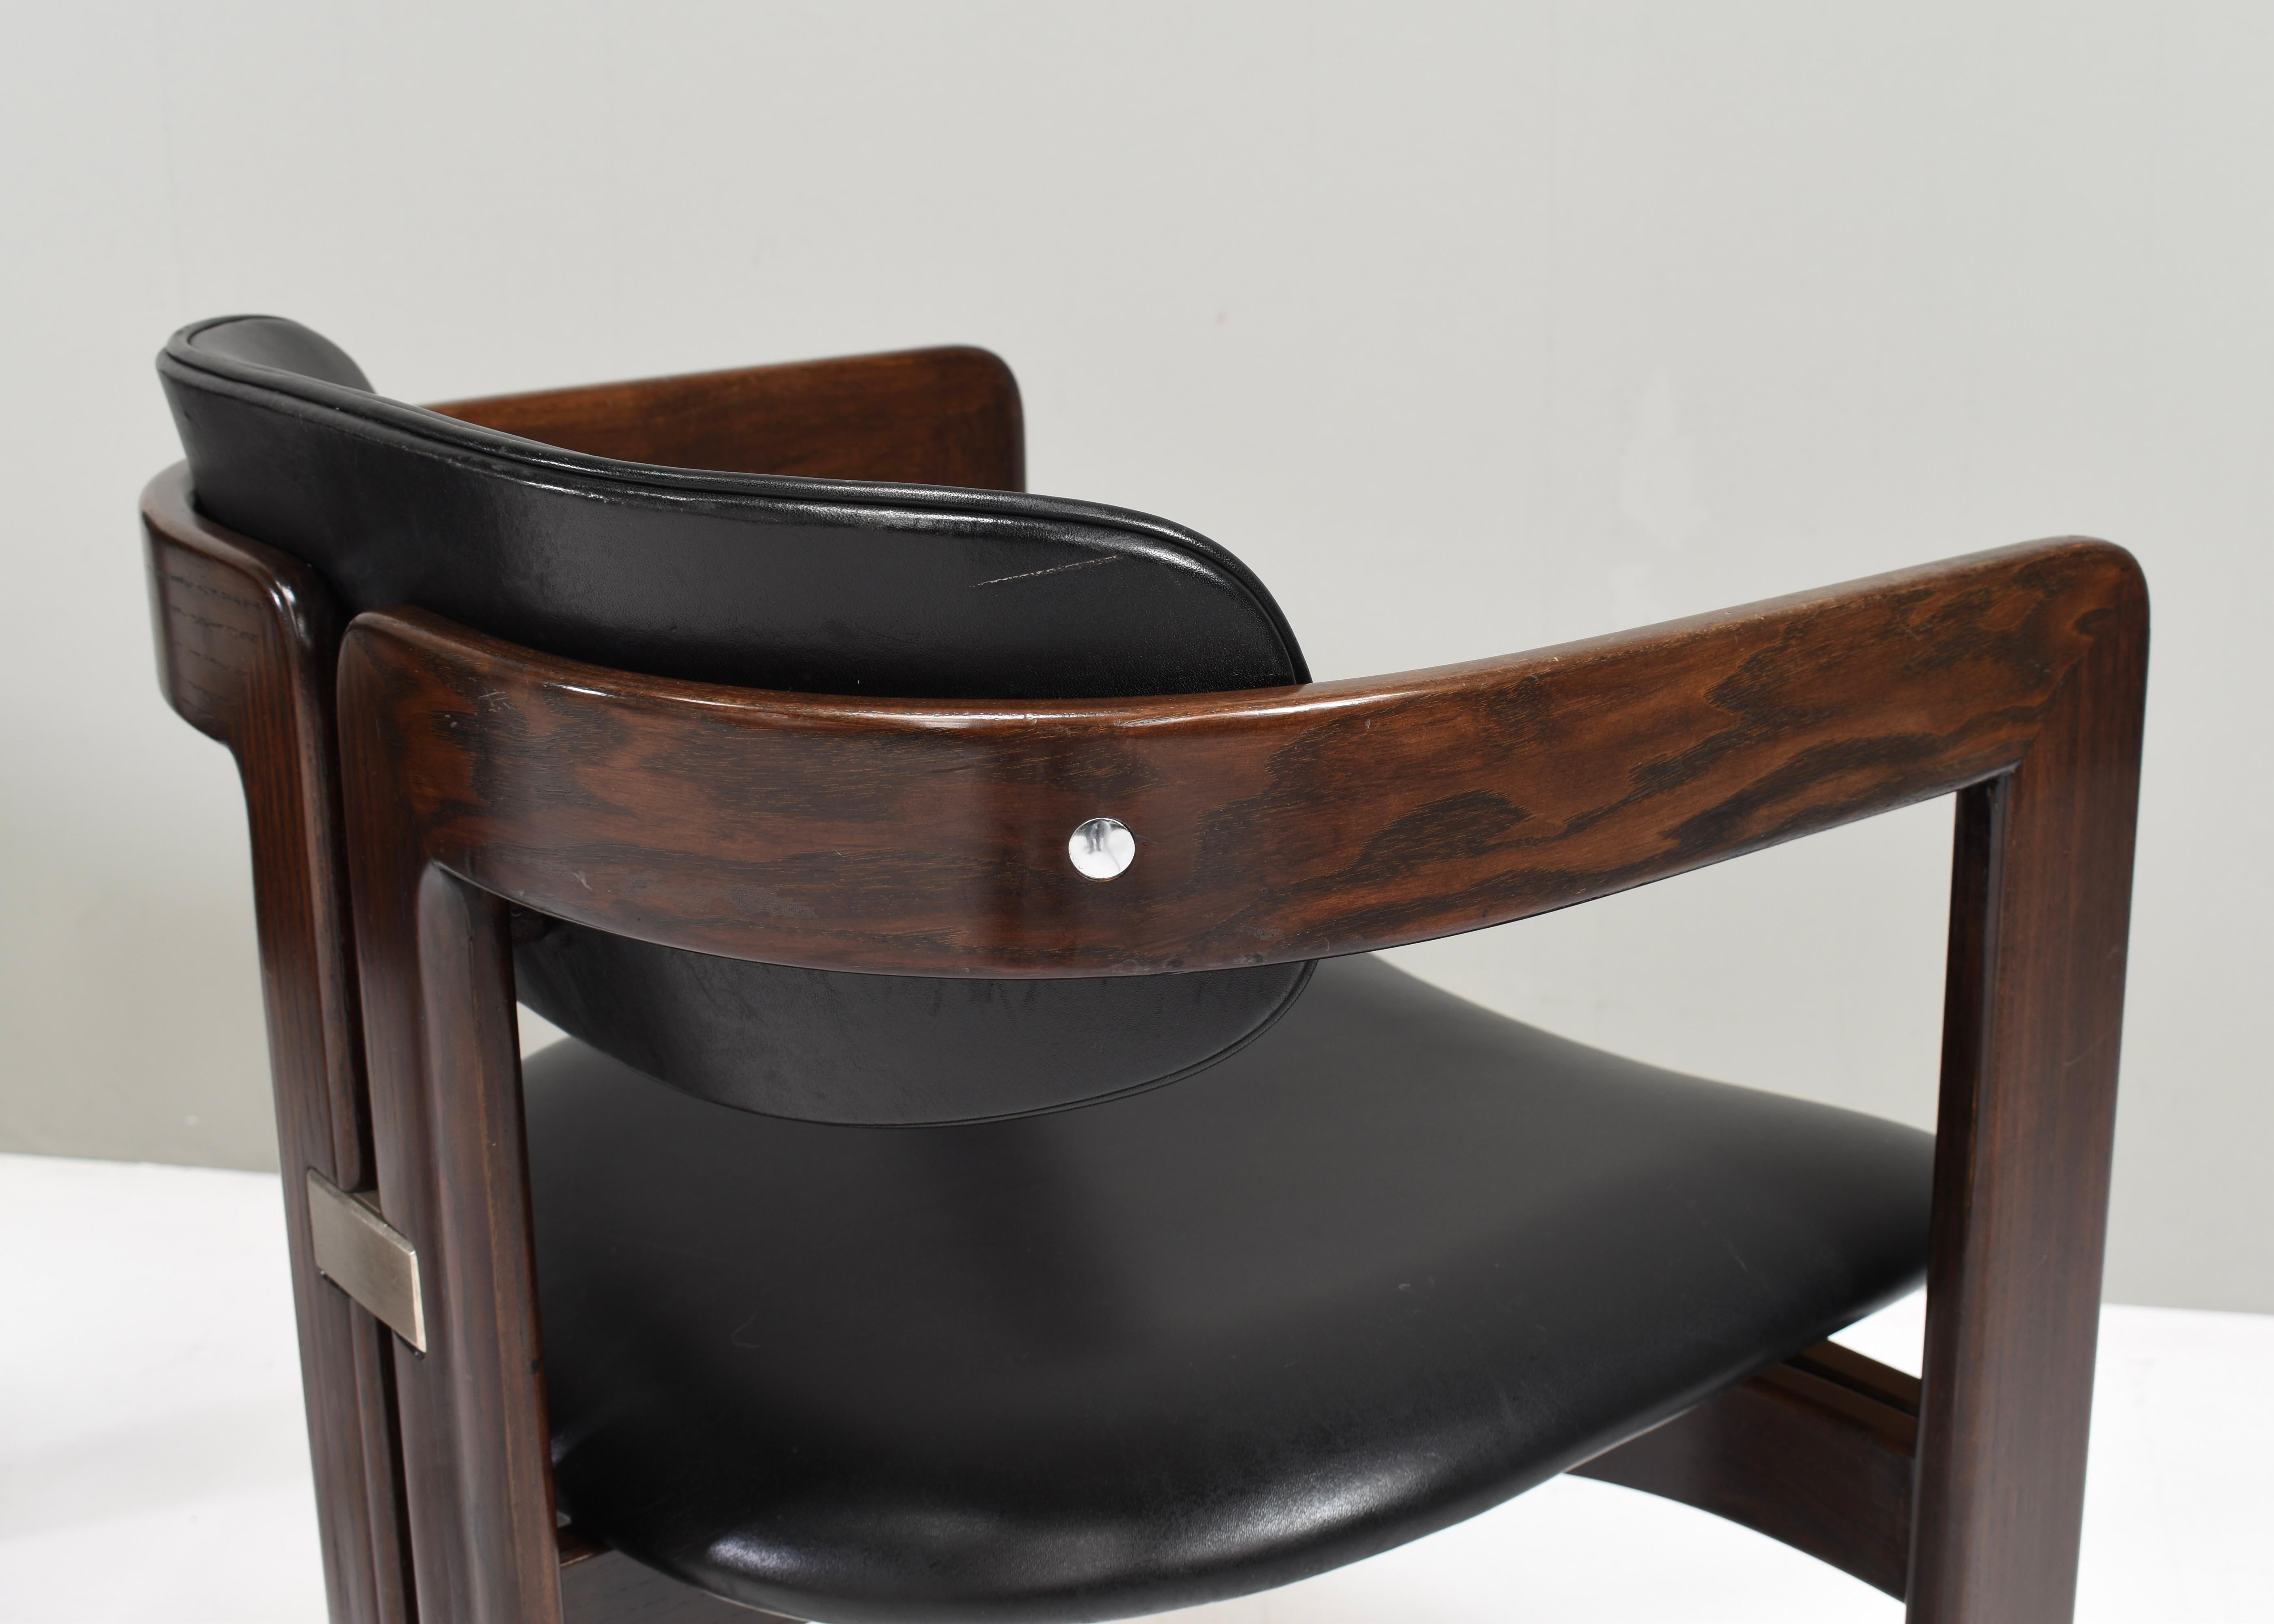 Pamplona Chairs by Augusti Savini in Black Leather - Italy, 1965, Set of 3  For Sale 4